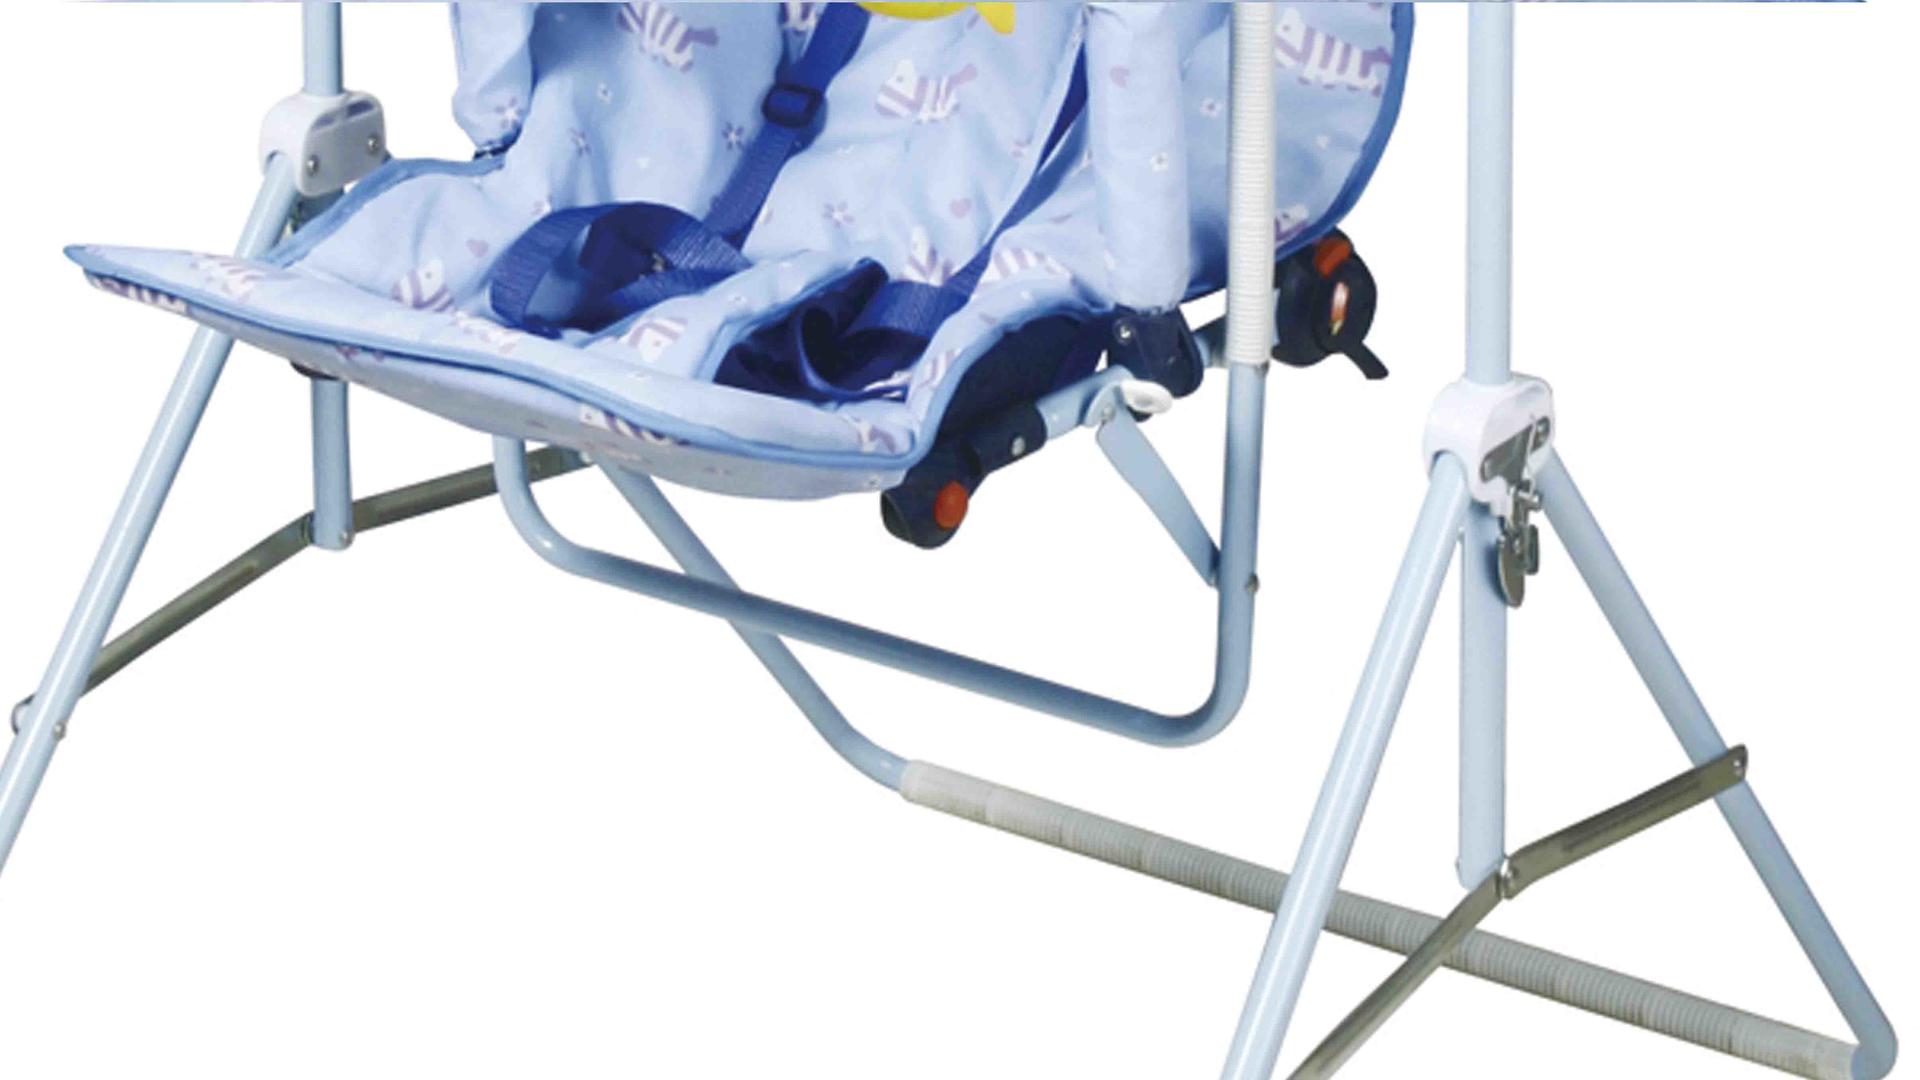 Aoqi cheap baby swings for sale inquire now for babys room